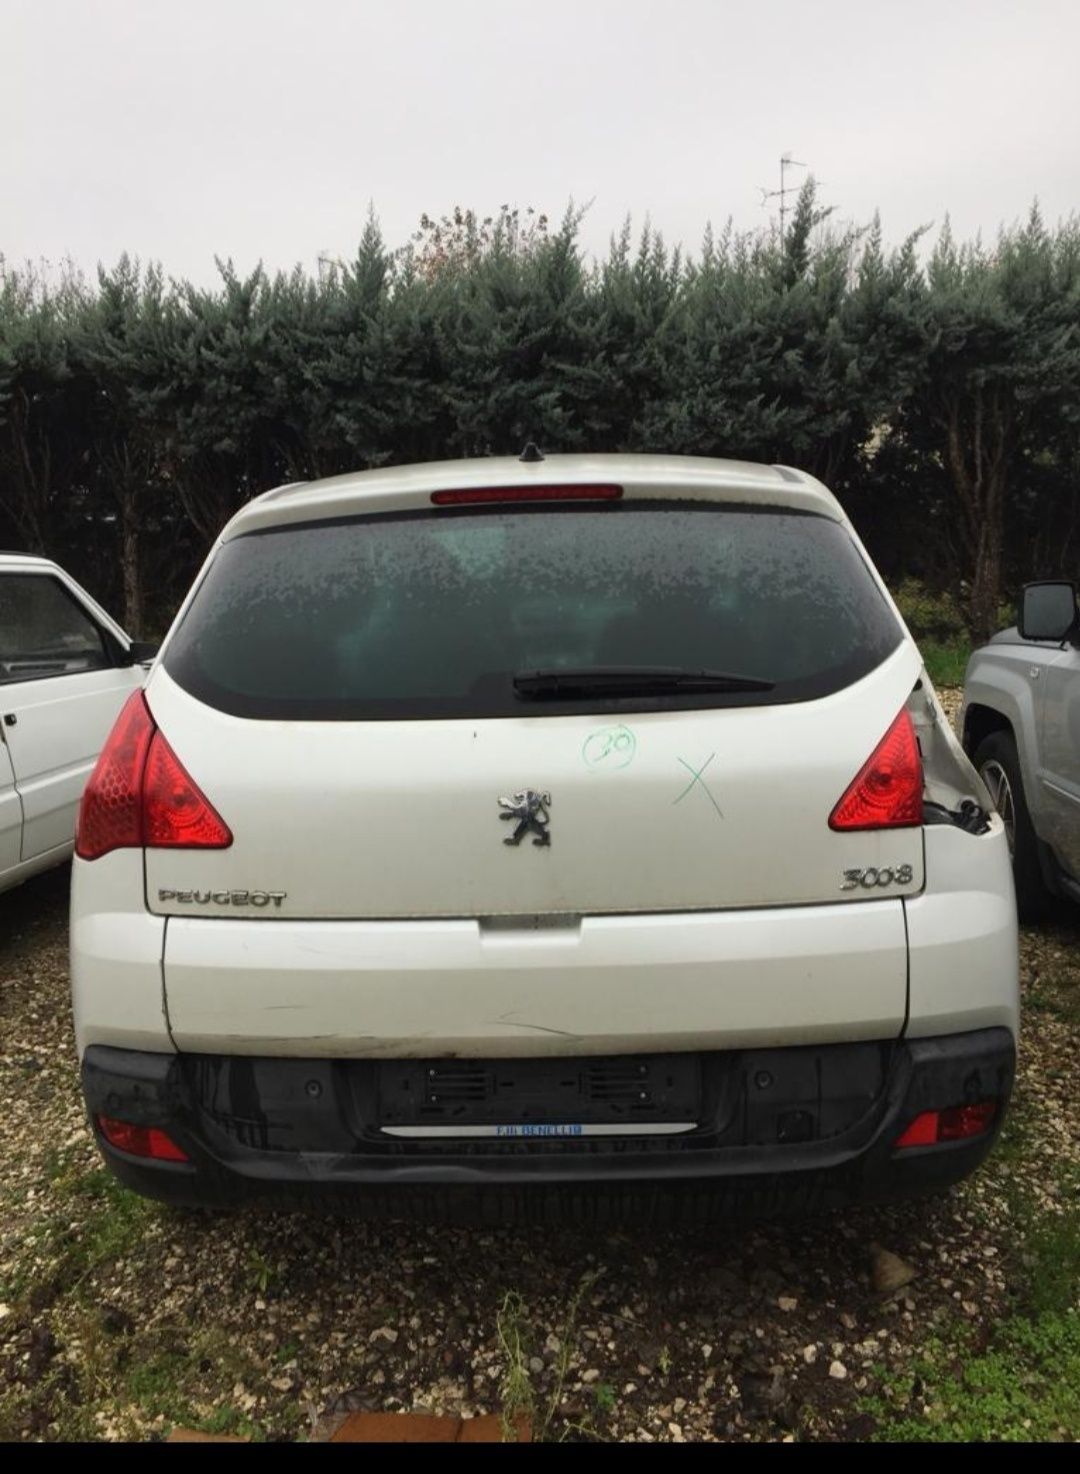 Haion piese spate peugeot 2008 3008 5008